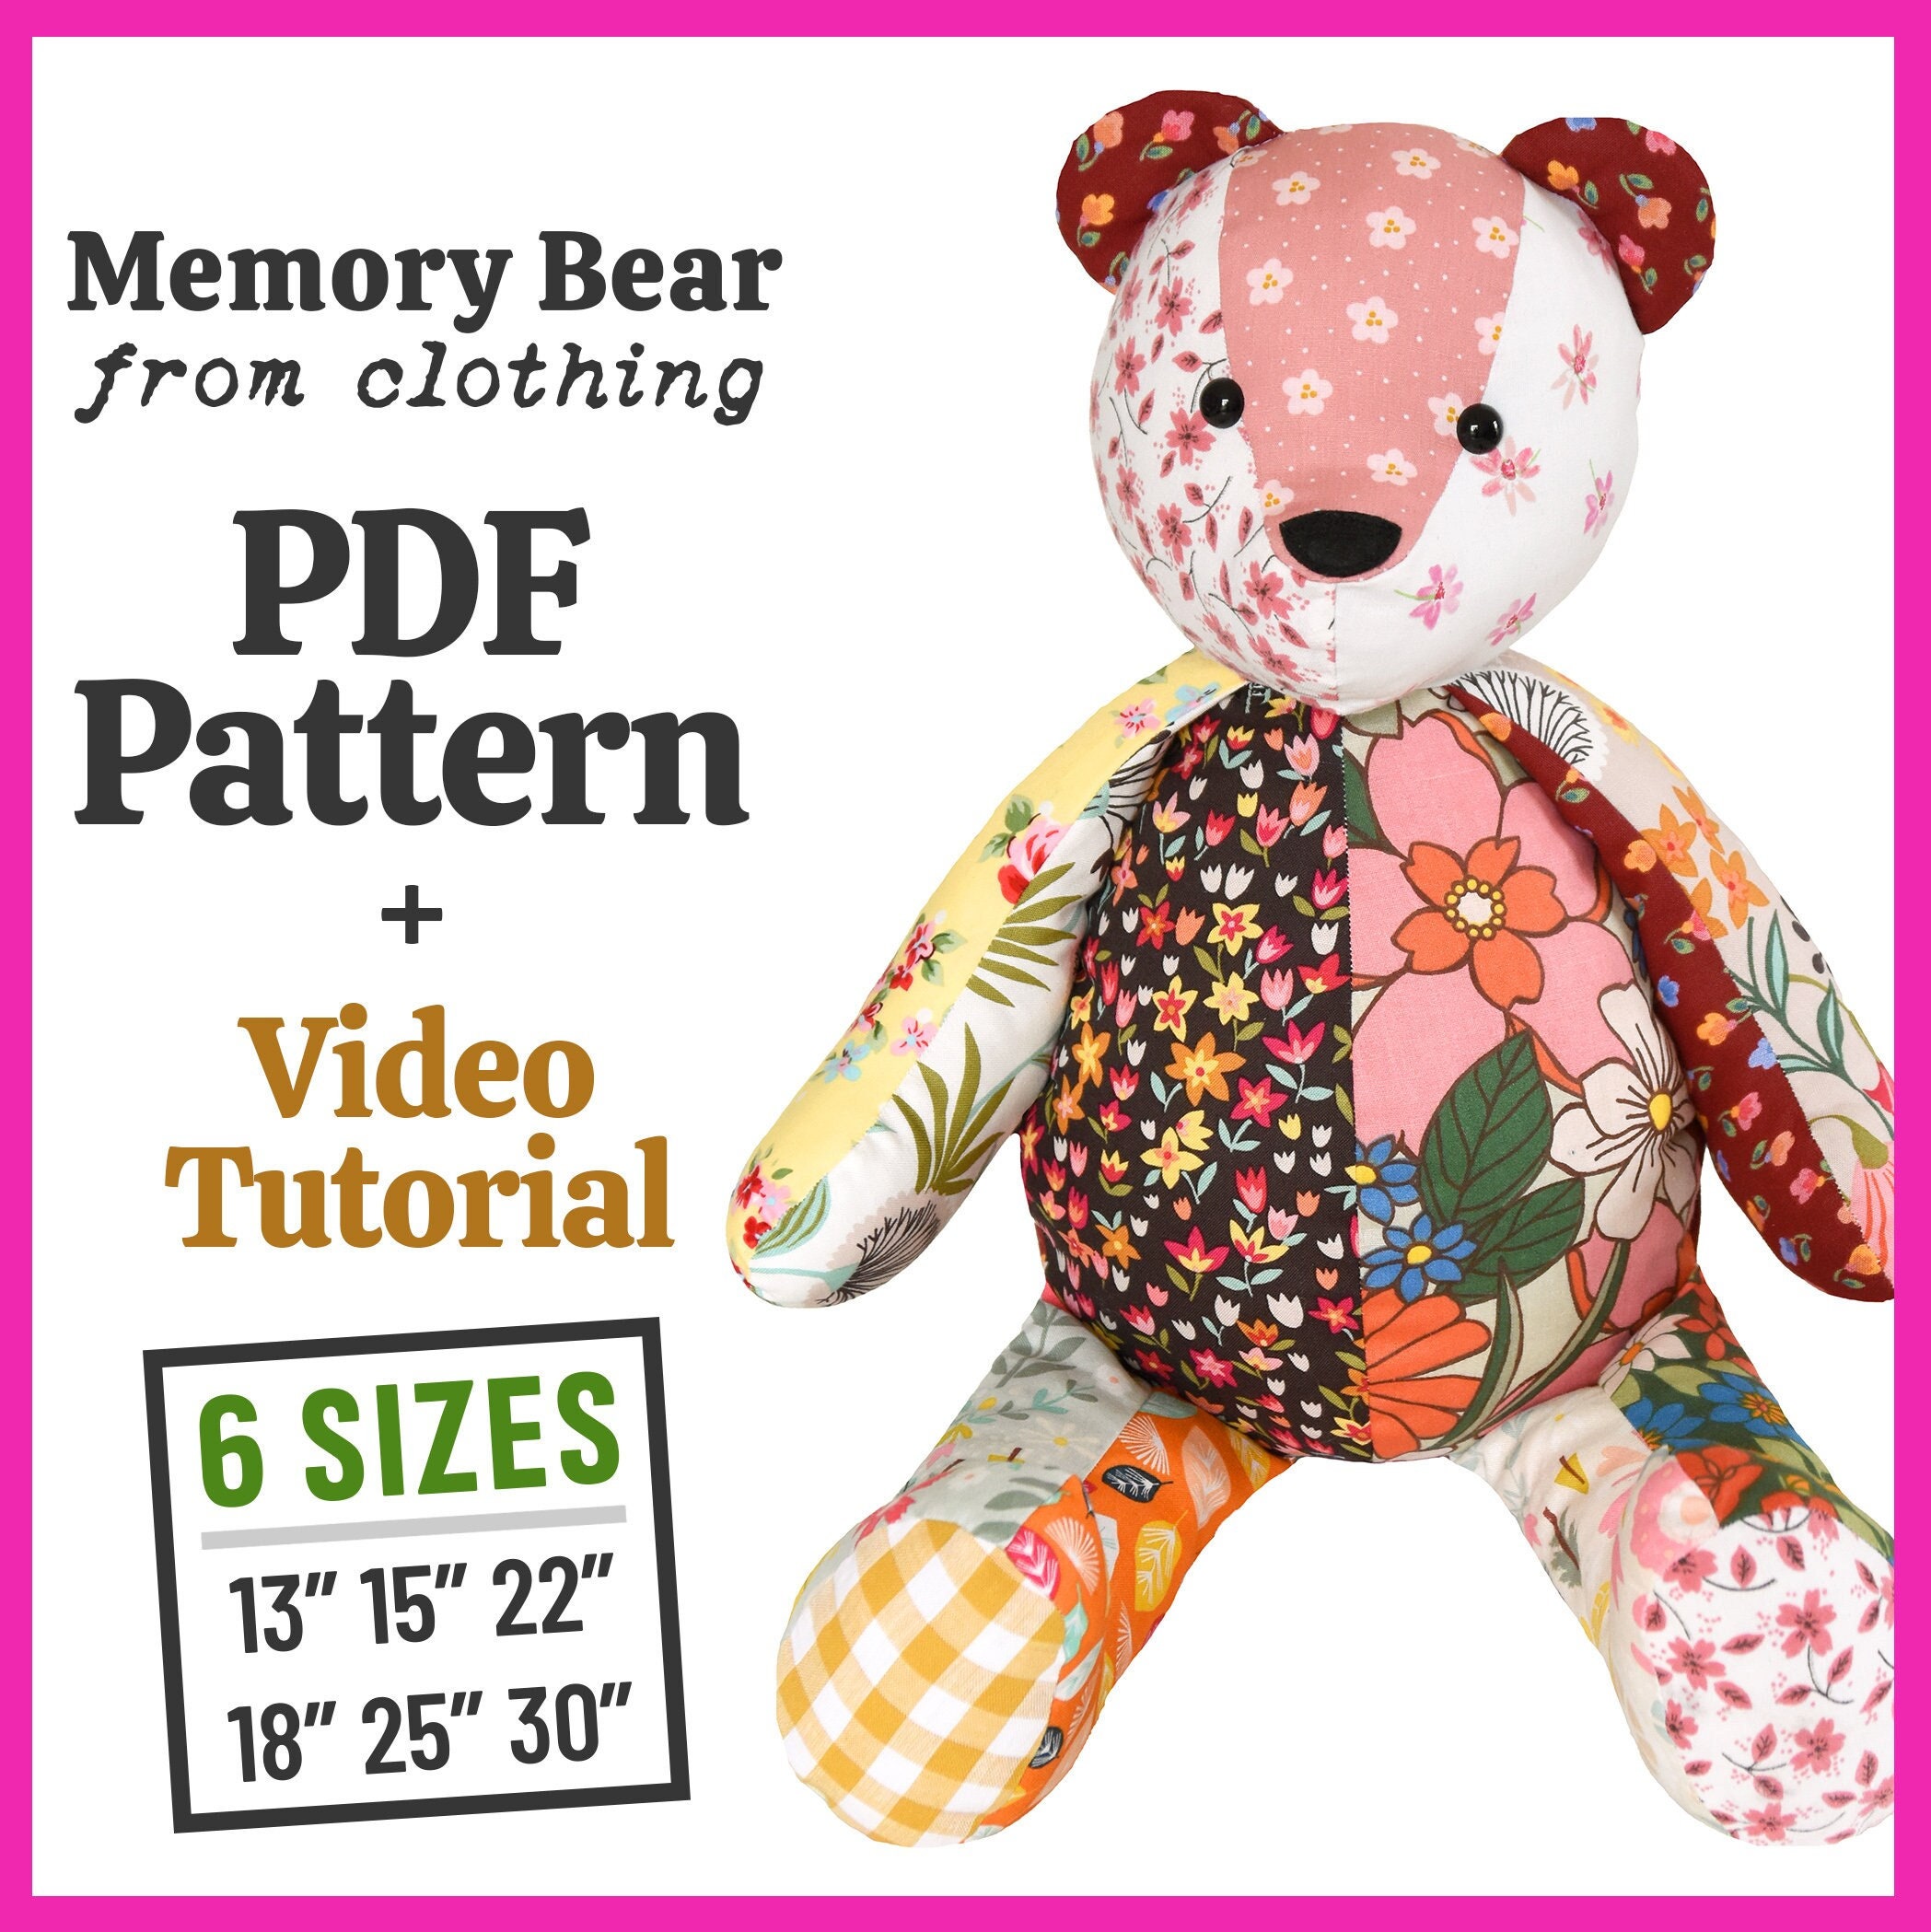 New Pattern Available – Teddy Bear